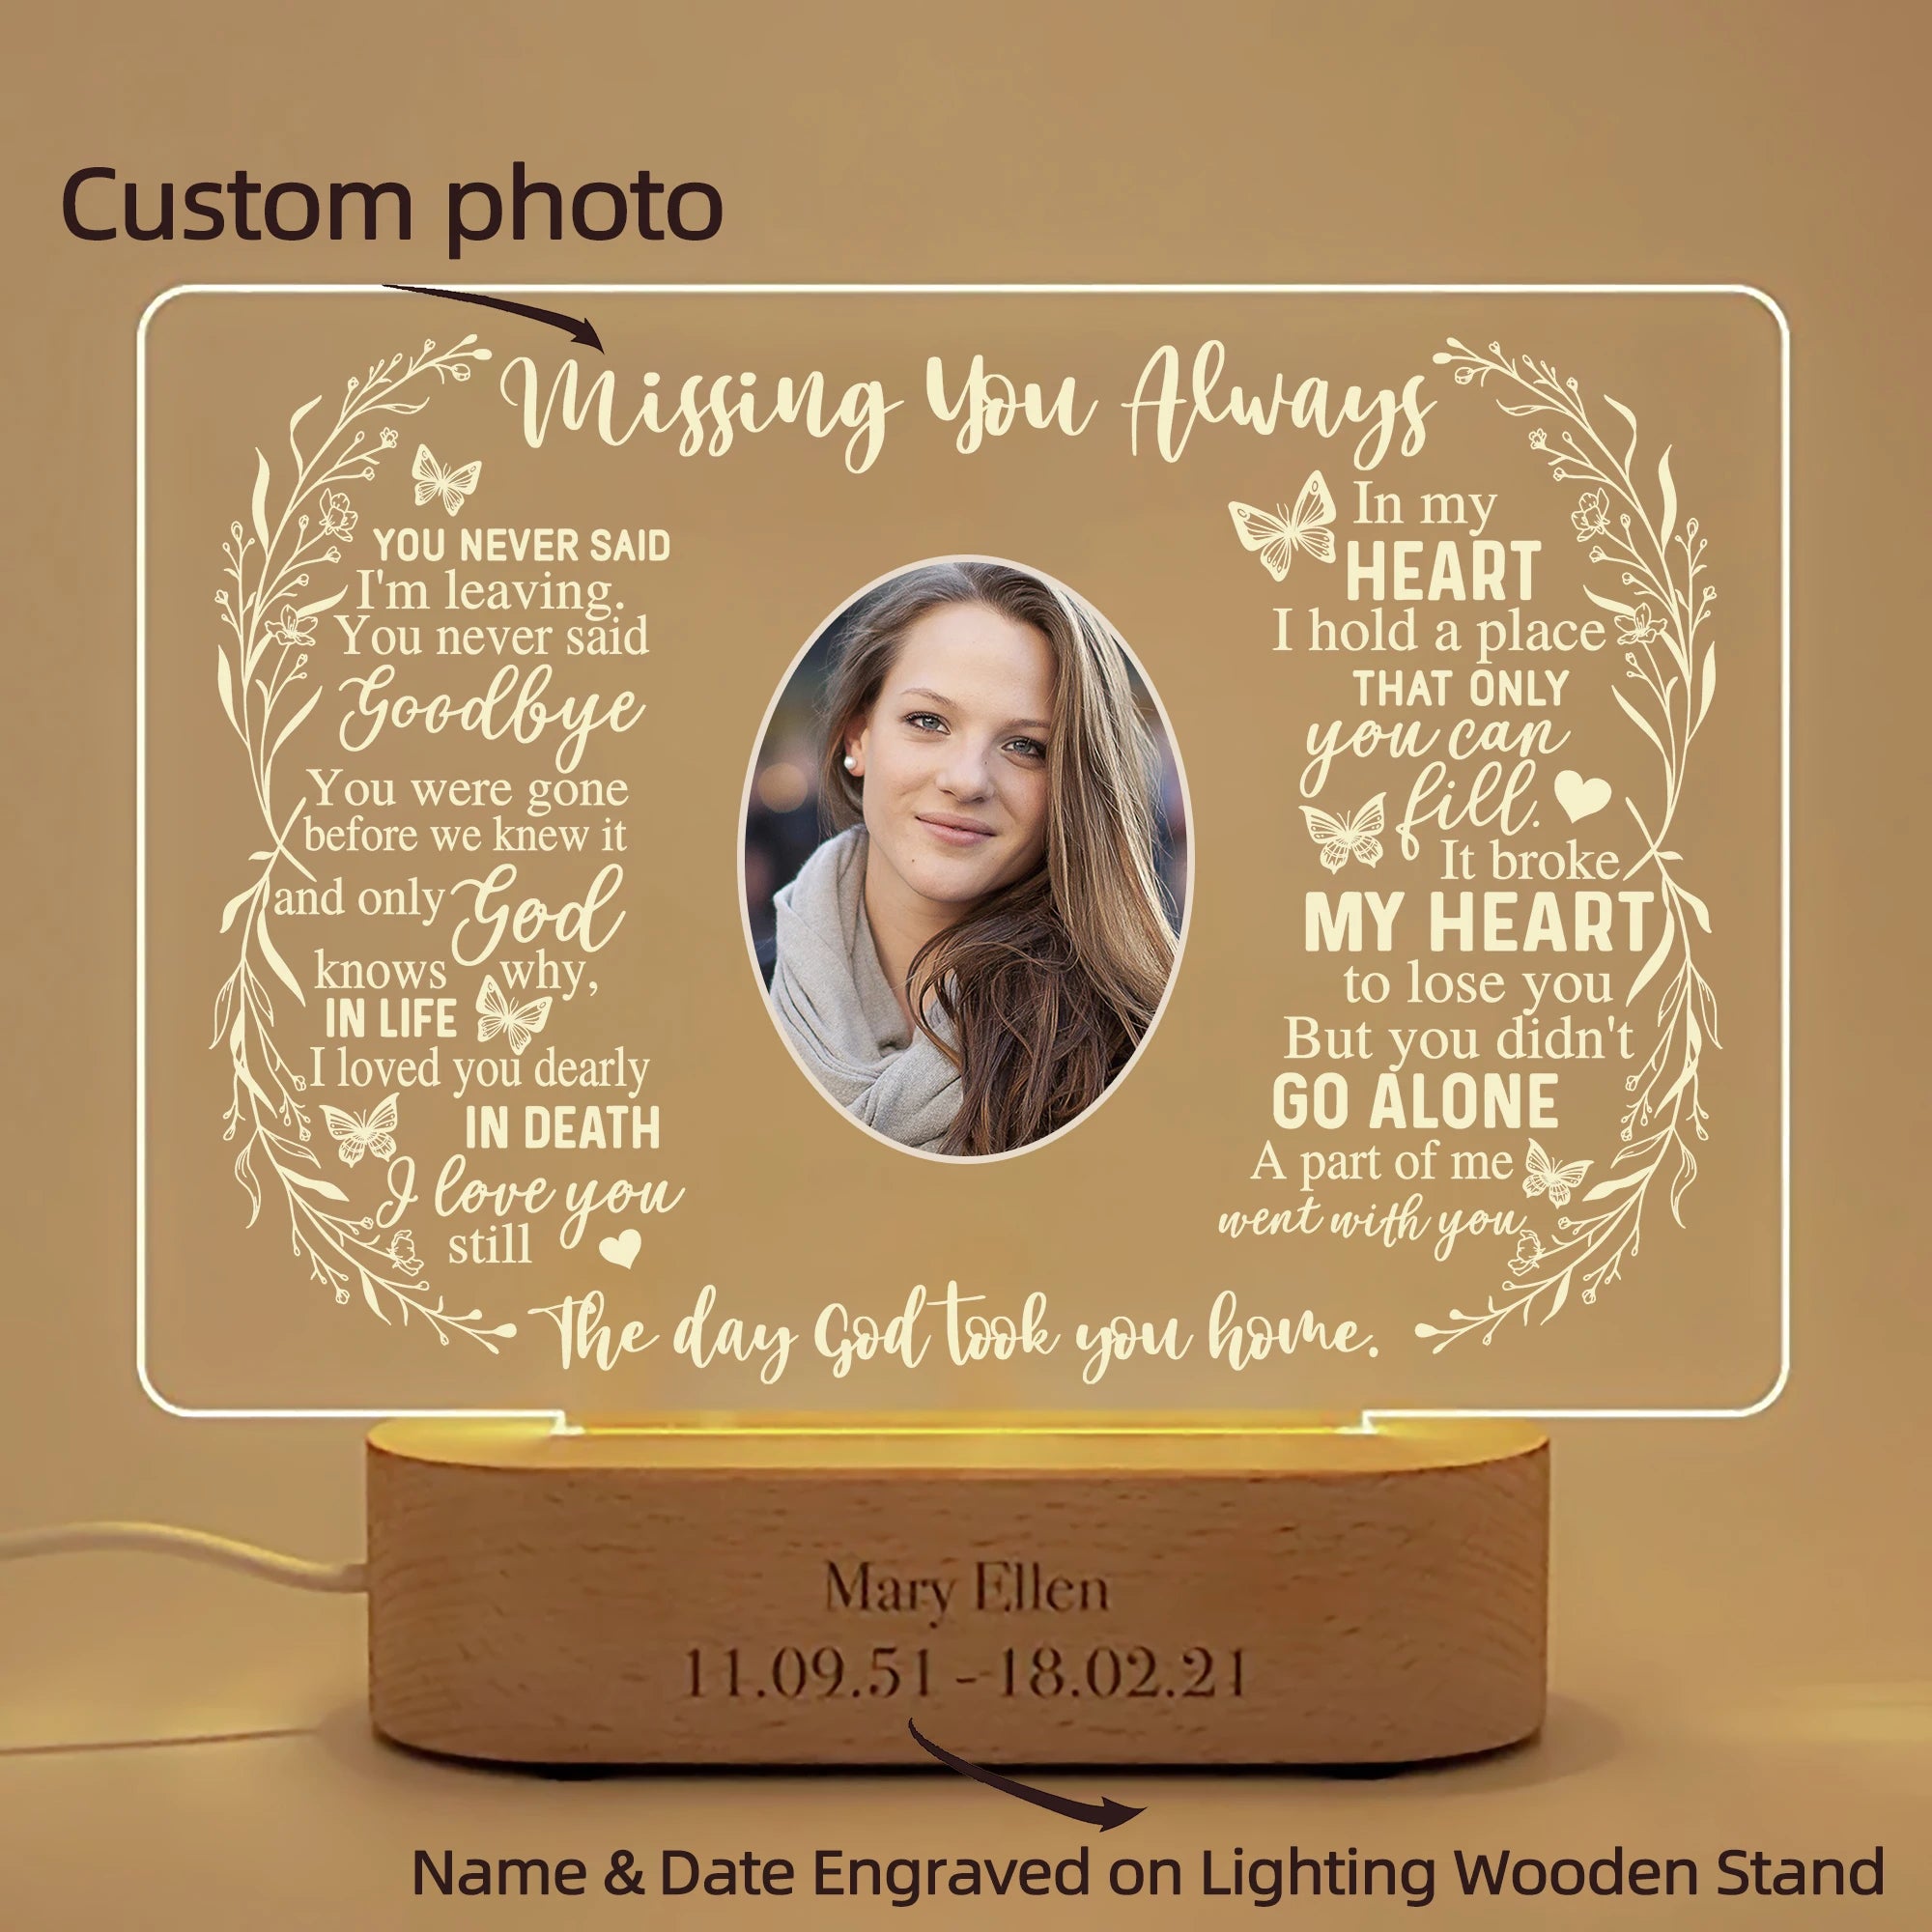 Customized Sympathy Gift - Unique In Memory of Loved Ones Light-Up Picture Frames with Personalized Photo and Text on Memorial Plaque Lamp Warm Light / Style 1